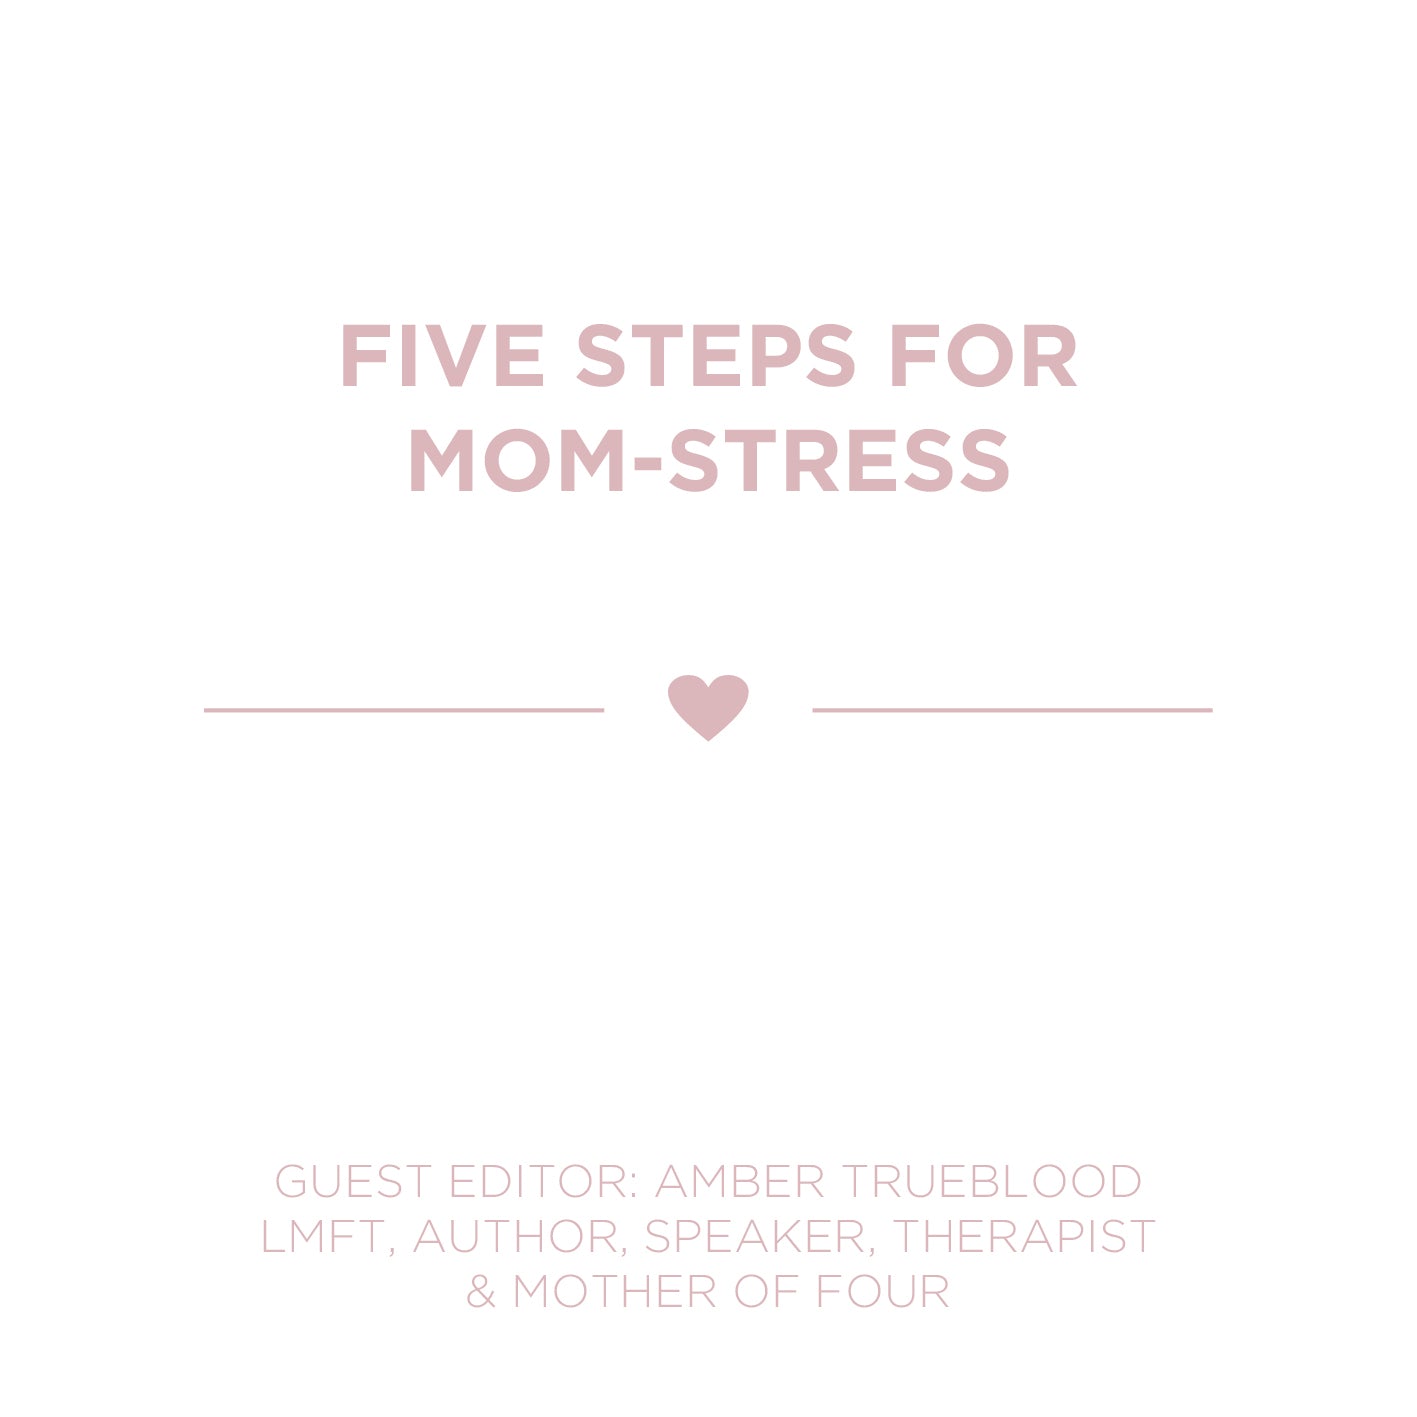 FIVE STEPS FOR MOM-STRESS